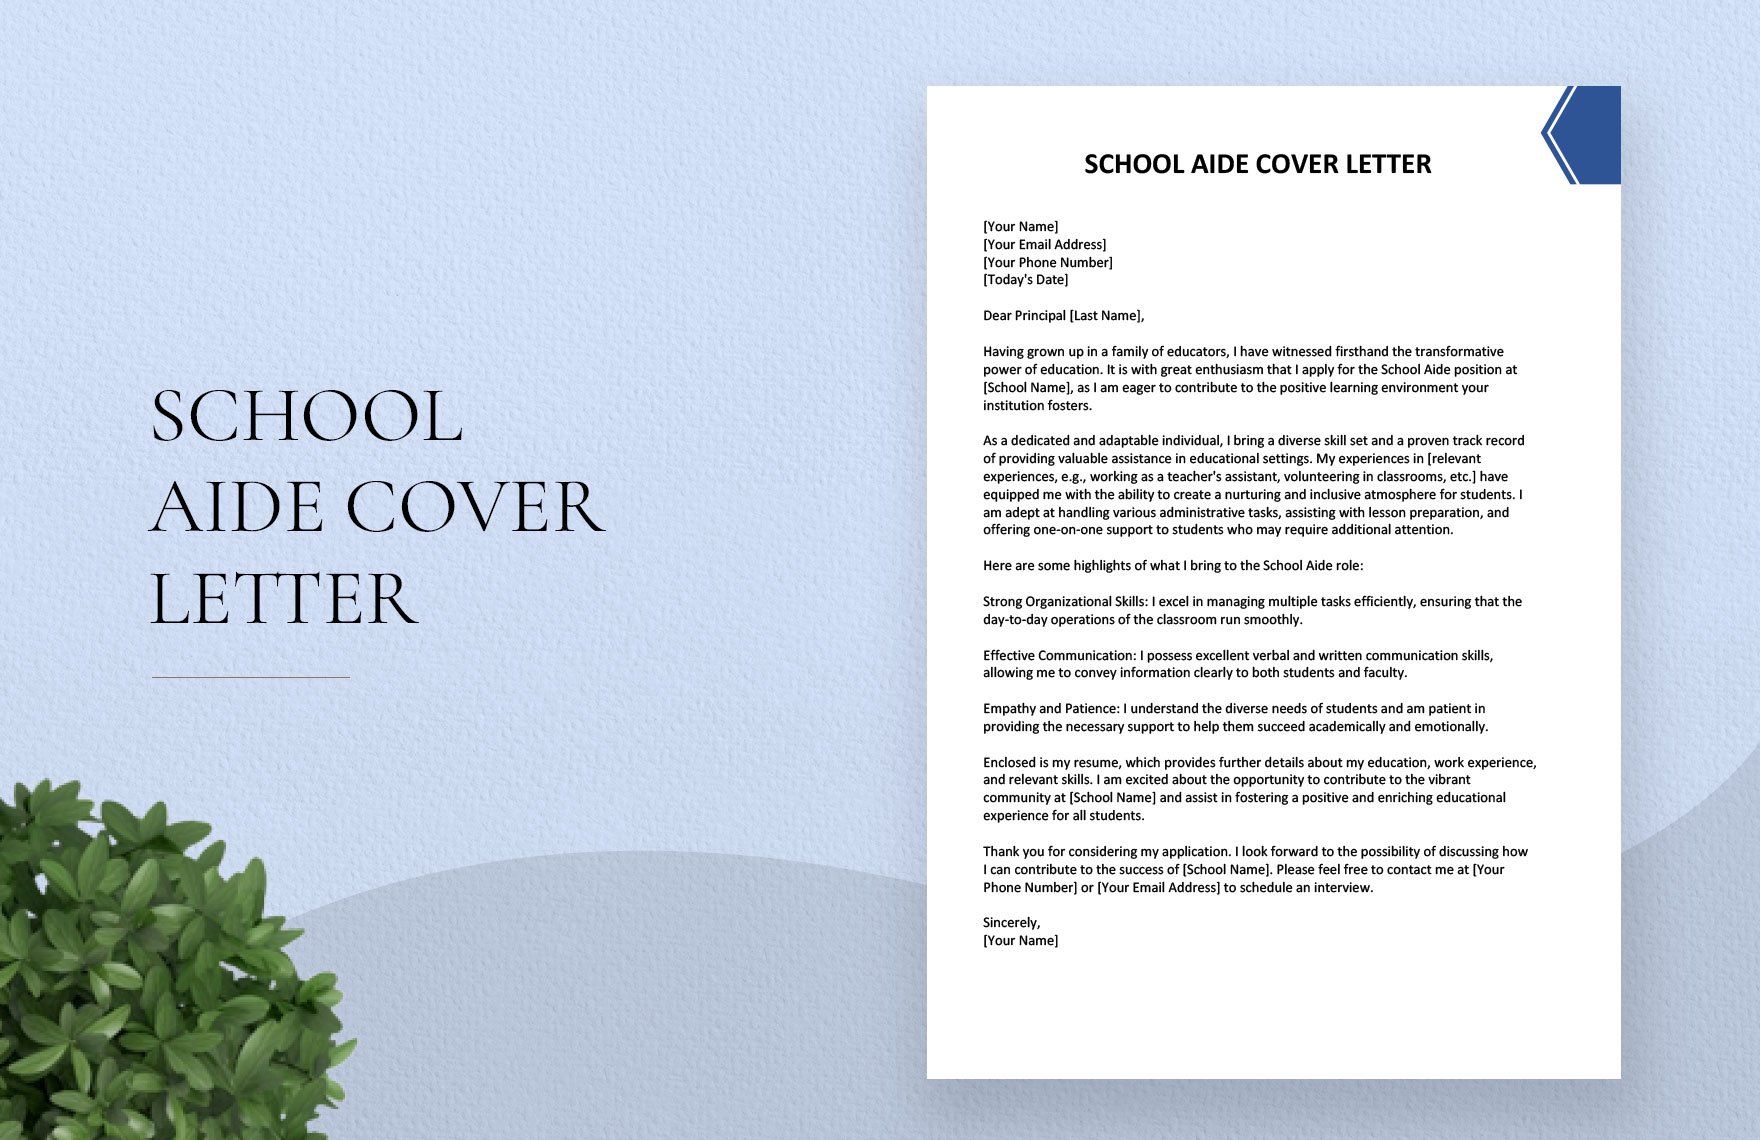 School Aide Cover Letter in Word, Google Docs